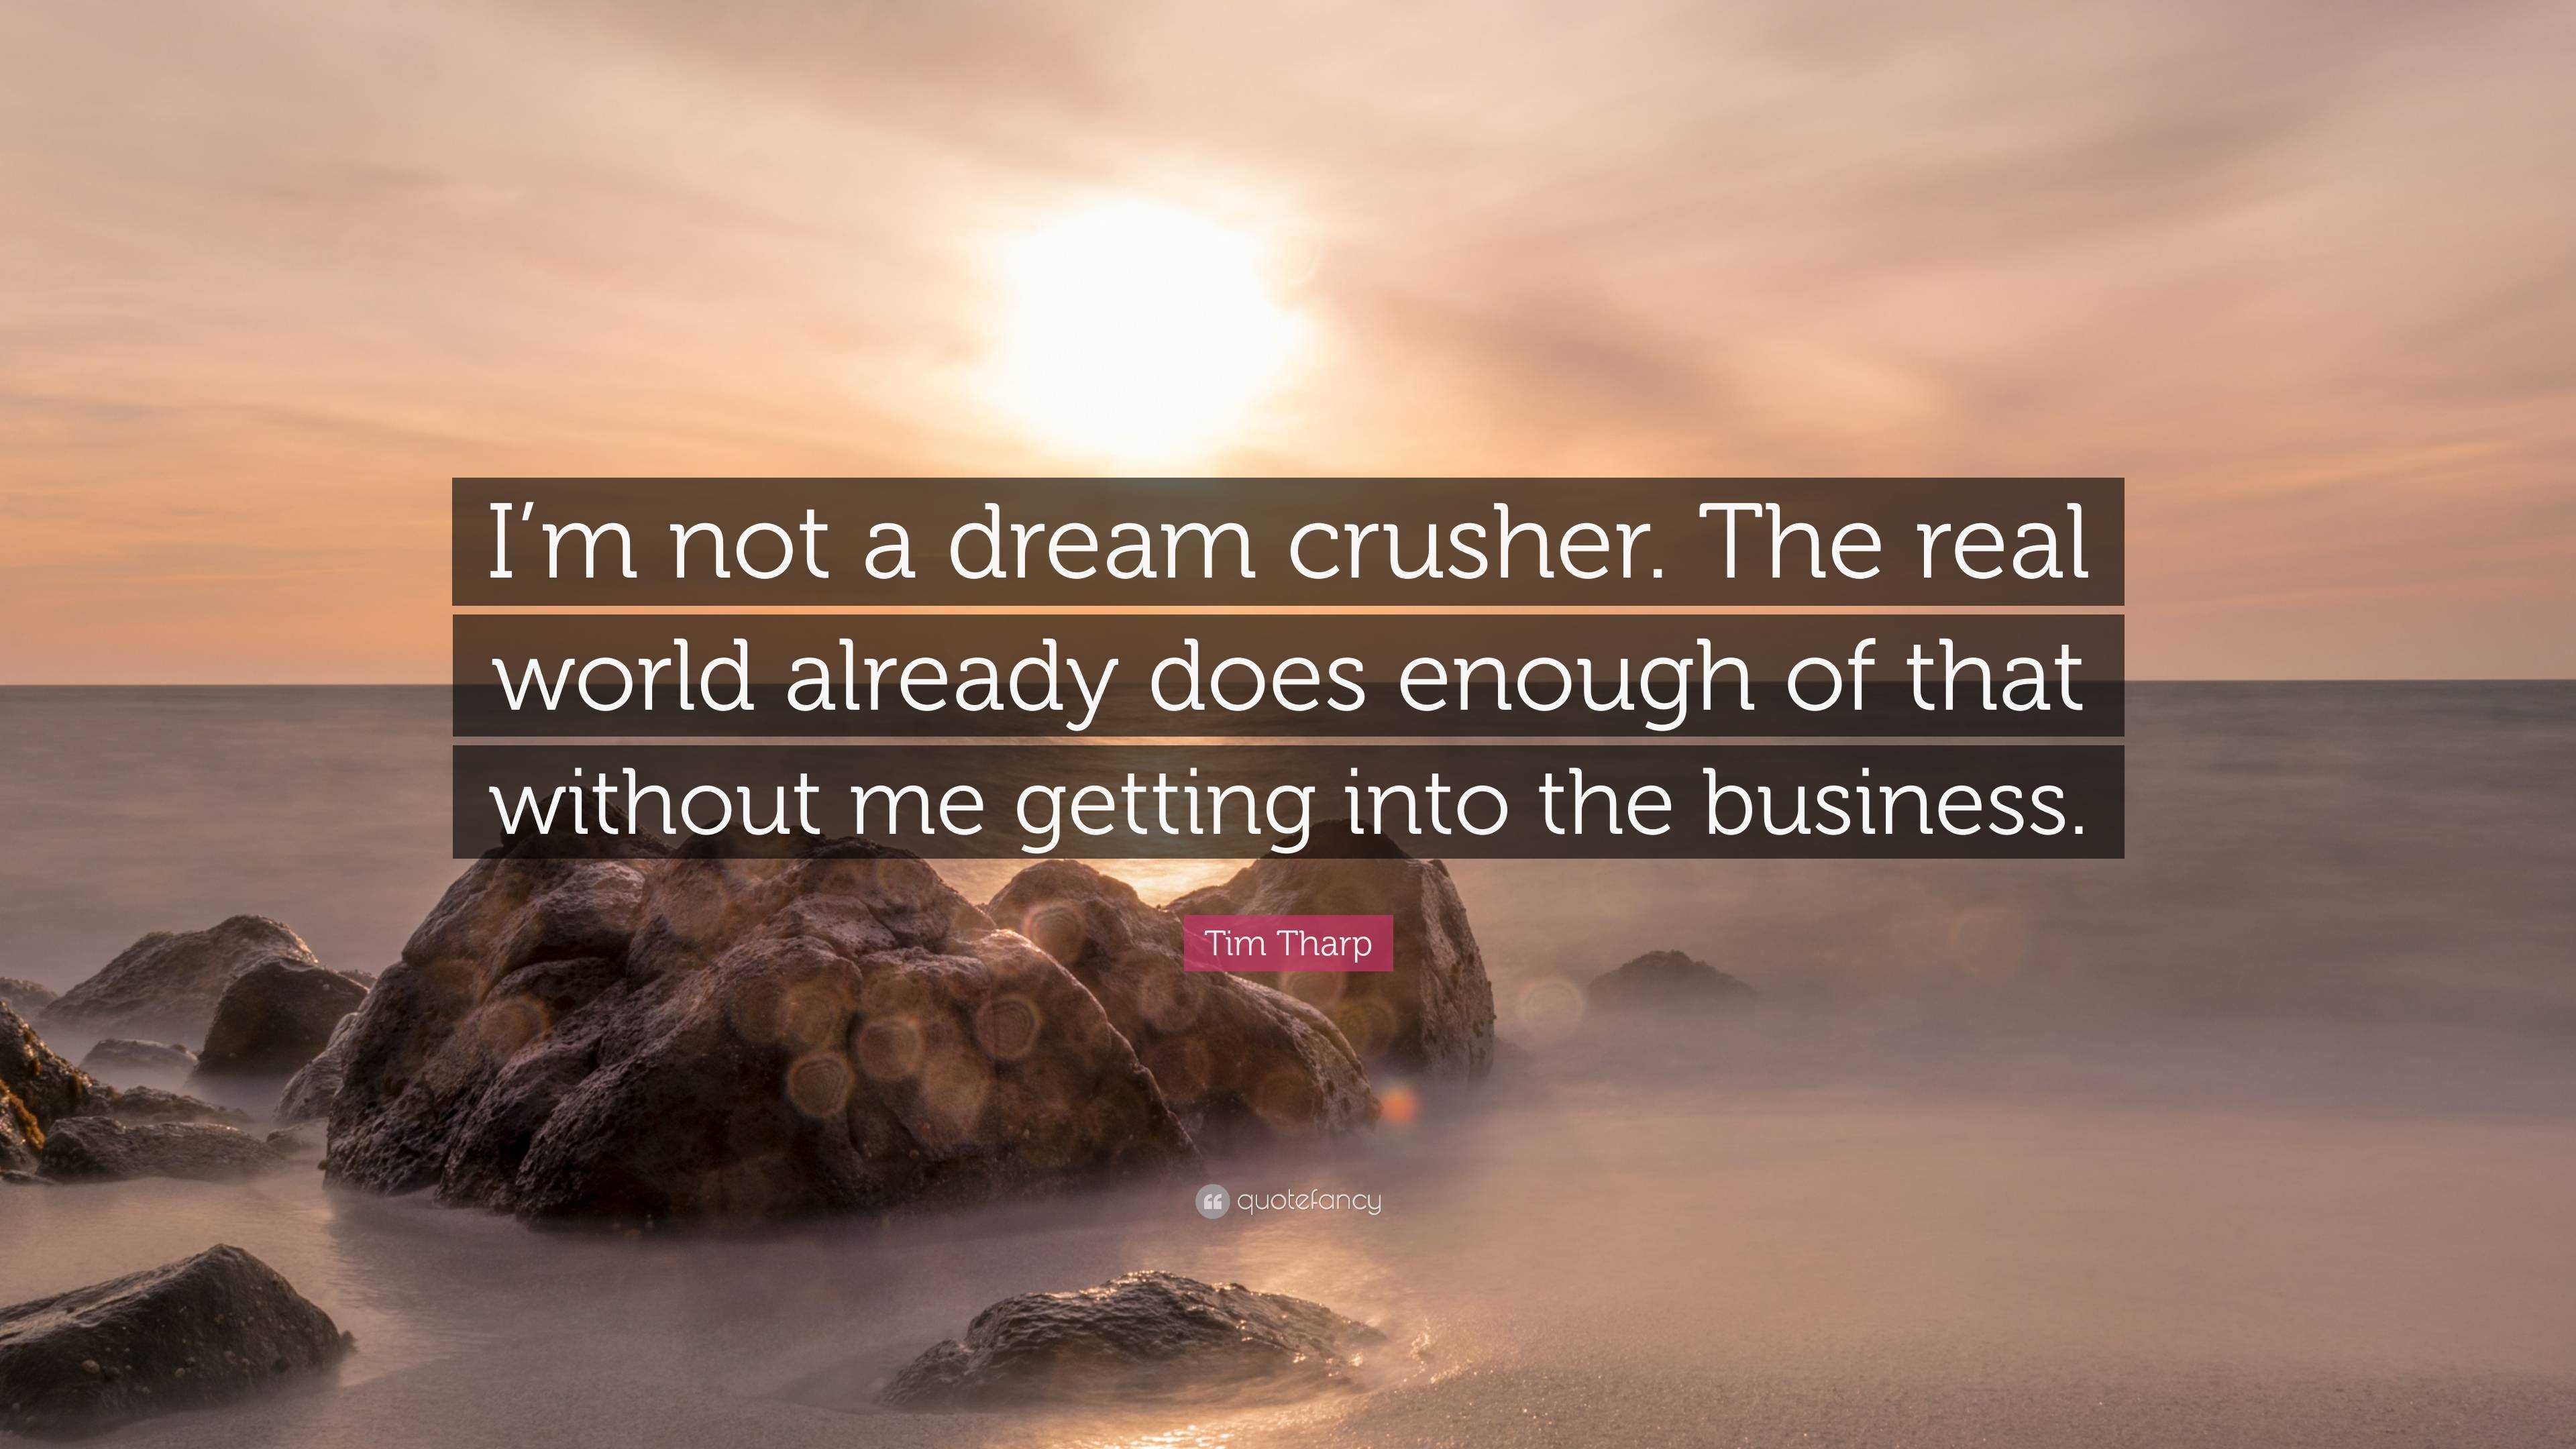 Tim Tharp Quote: “I'm not a dream crusher. The real world already